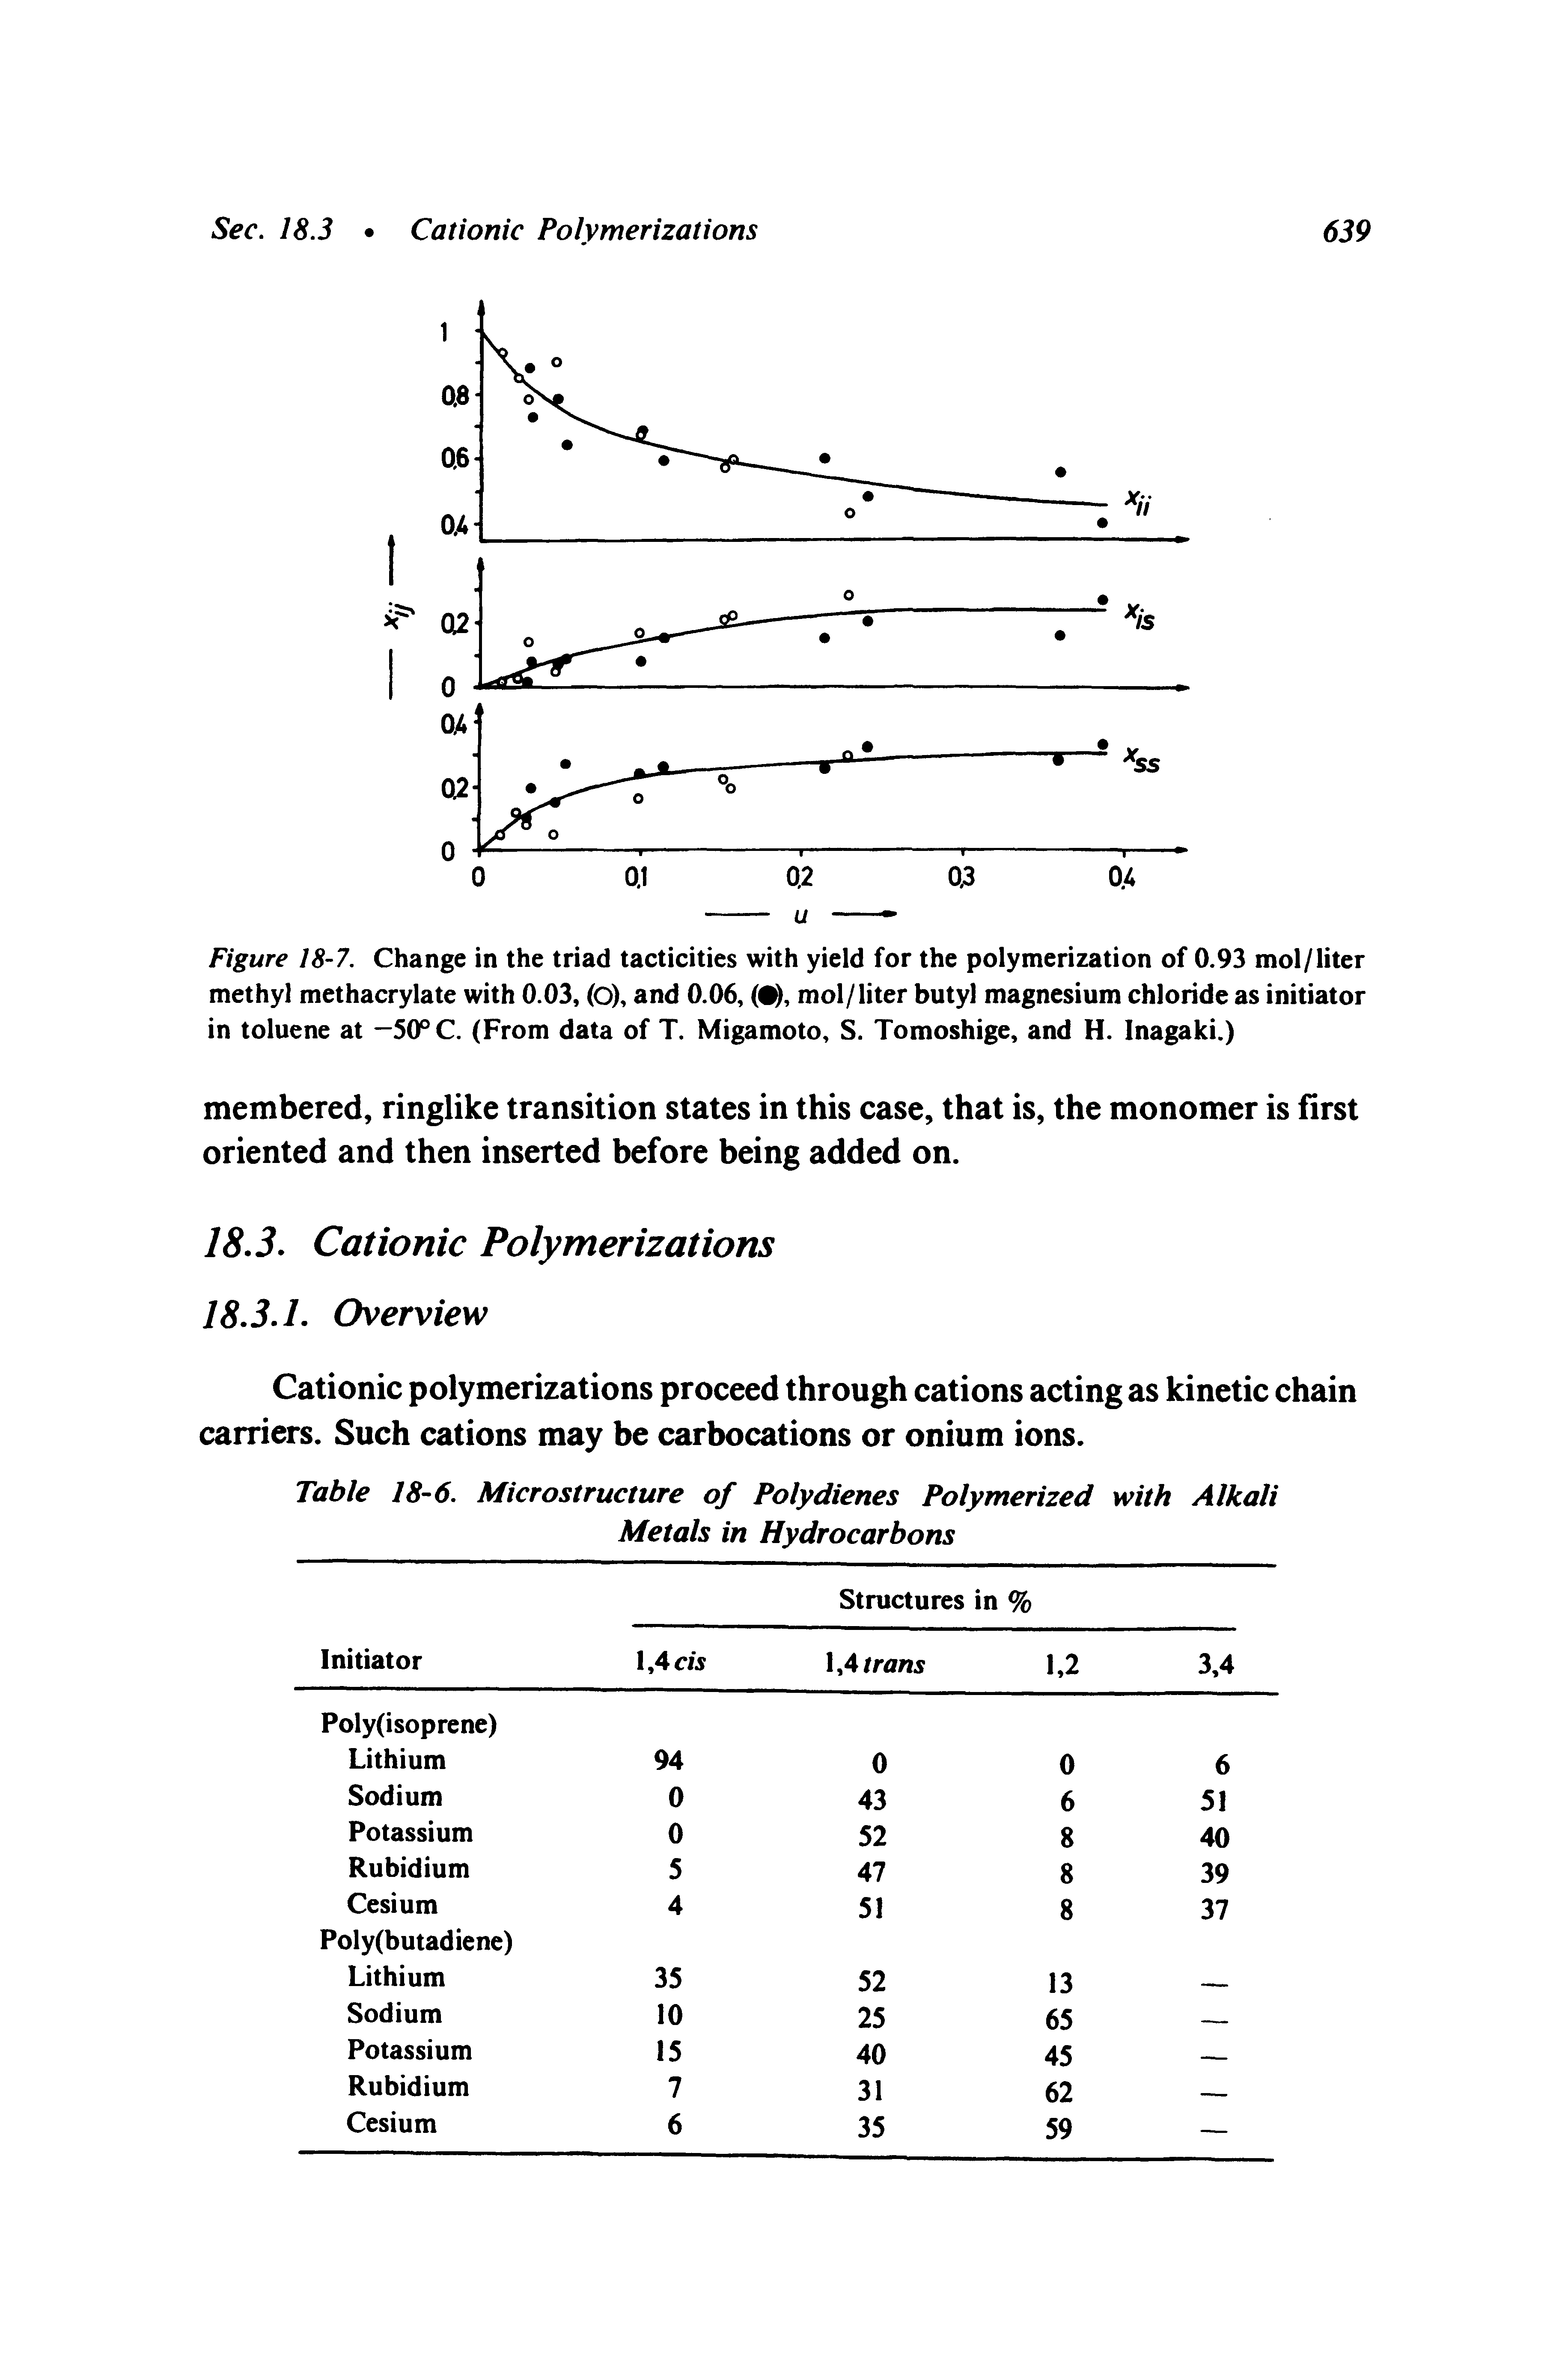 Figure 18-7. Change in the triad tacticities with yield for the polymerization of 0.93 mol/liter methyl methacrylate with 0.03, (O), and 0.06, ( ), mol/liter butyl magnesium chloride as initiator in toluene at —5(fC. (From data of T. Migamoto, S. Tomoshige, and H. Inagaki.)...